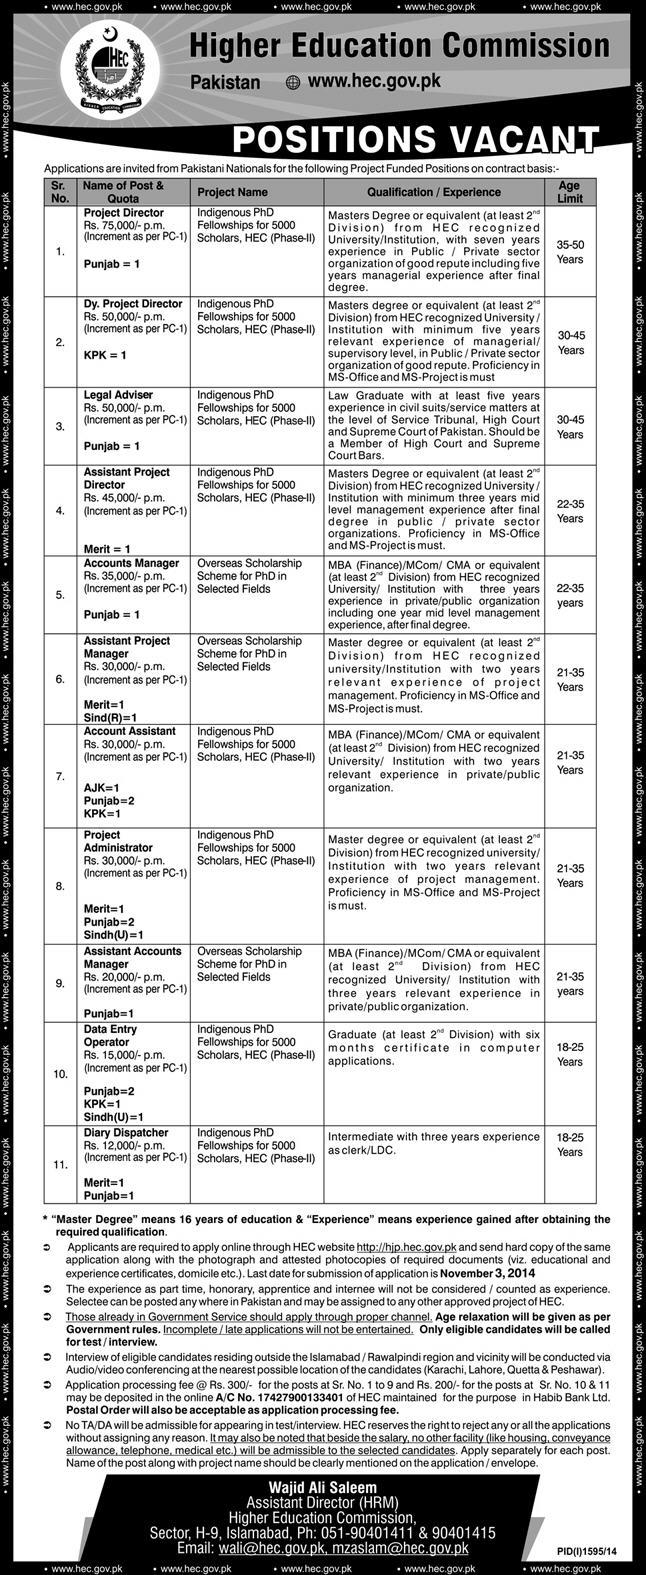 Higher Education Commission (HEC) Jobs 2014-October-03